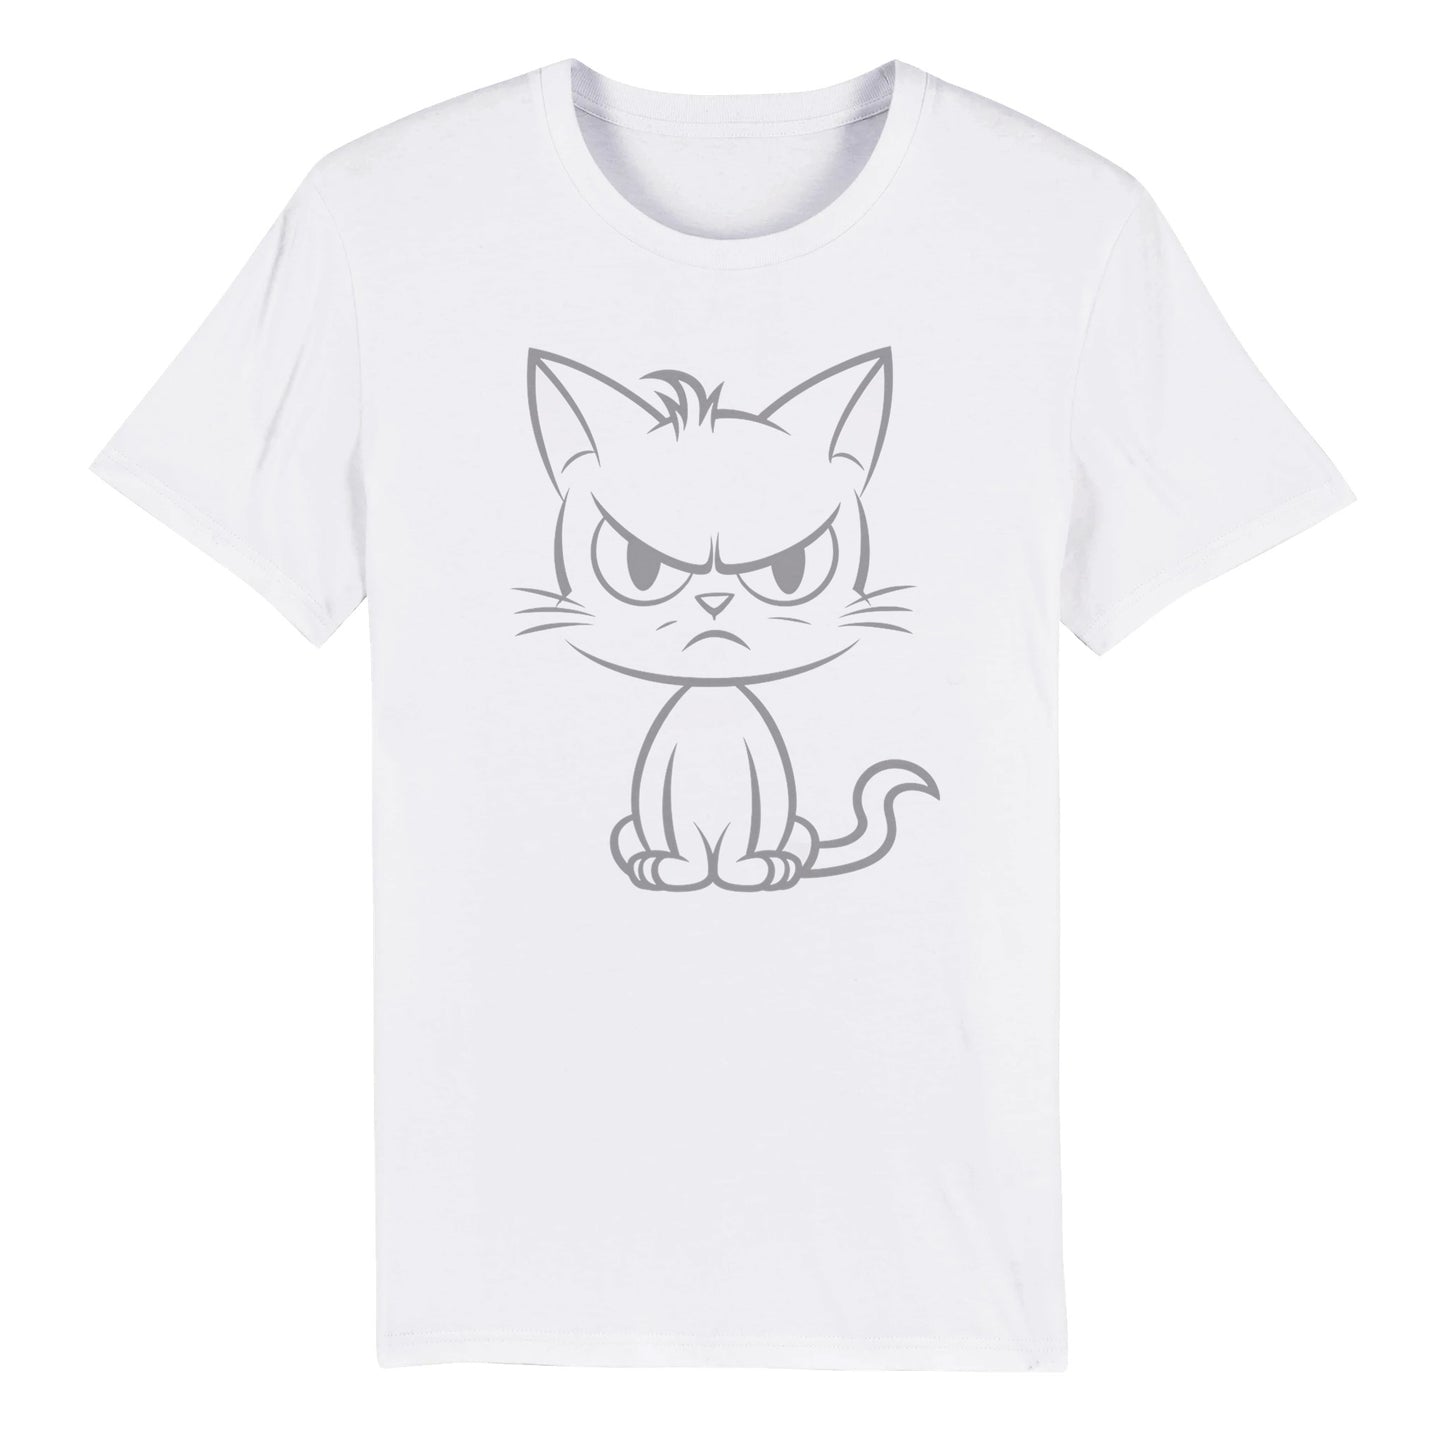 Express Yourself: Moody Cat Organic Tee for Every Mood! 😼